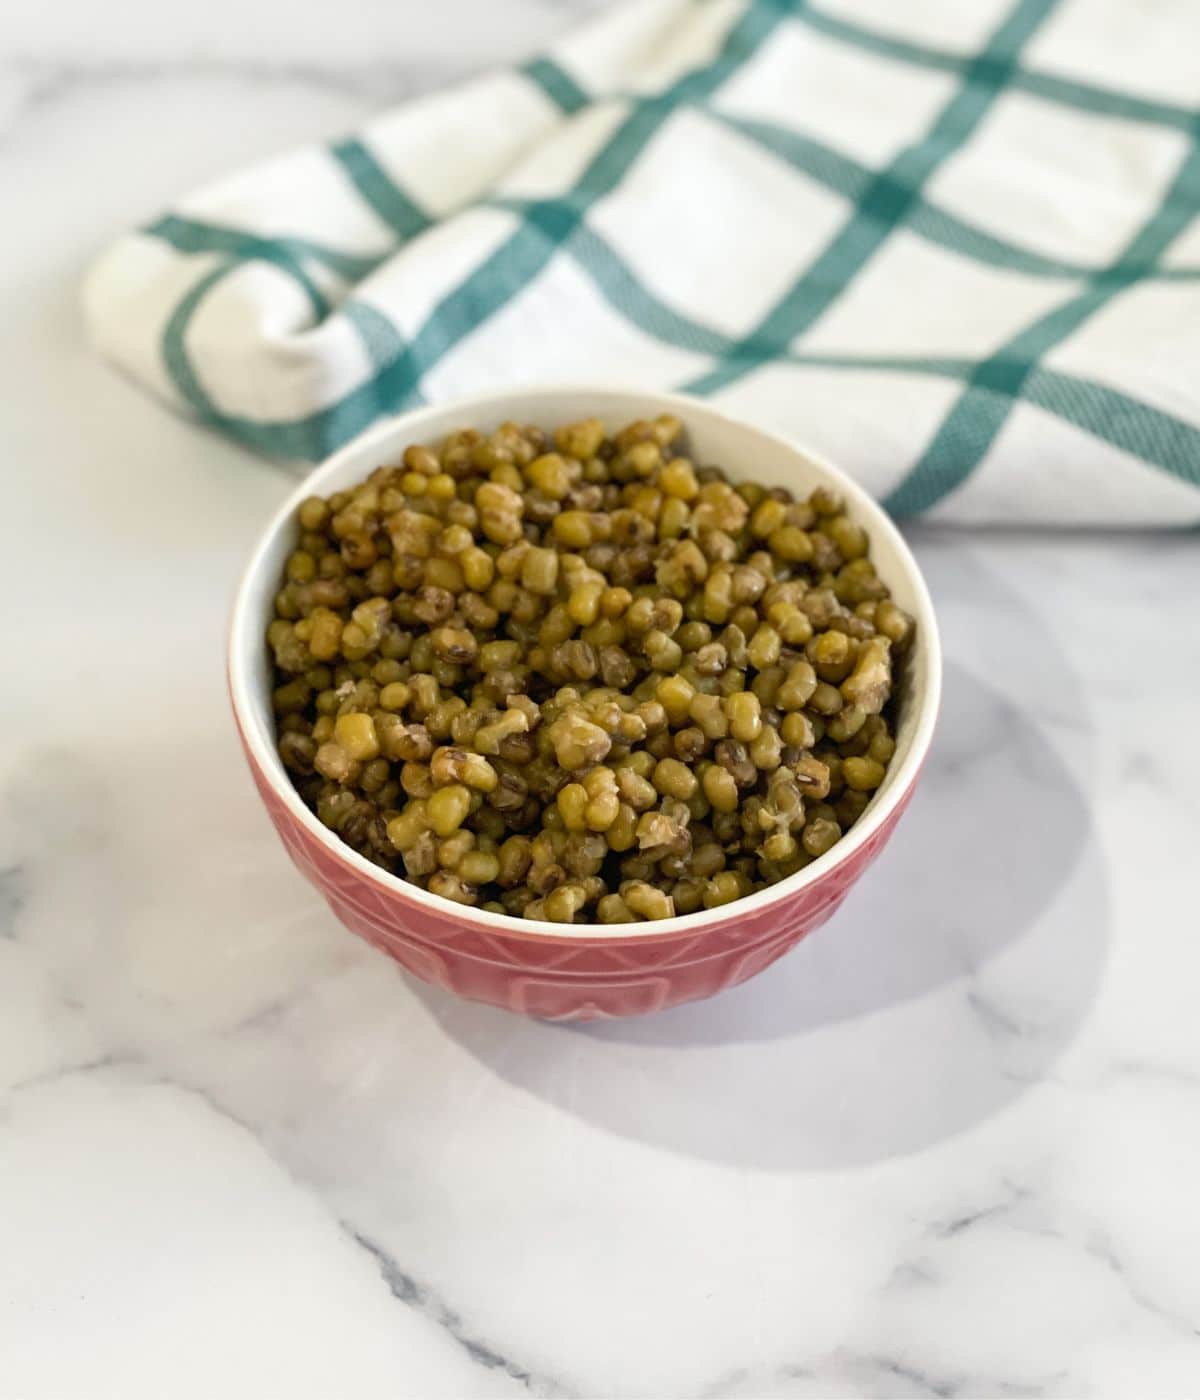 A bowl of mung bean is on the table.